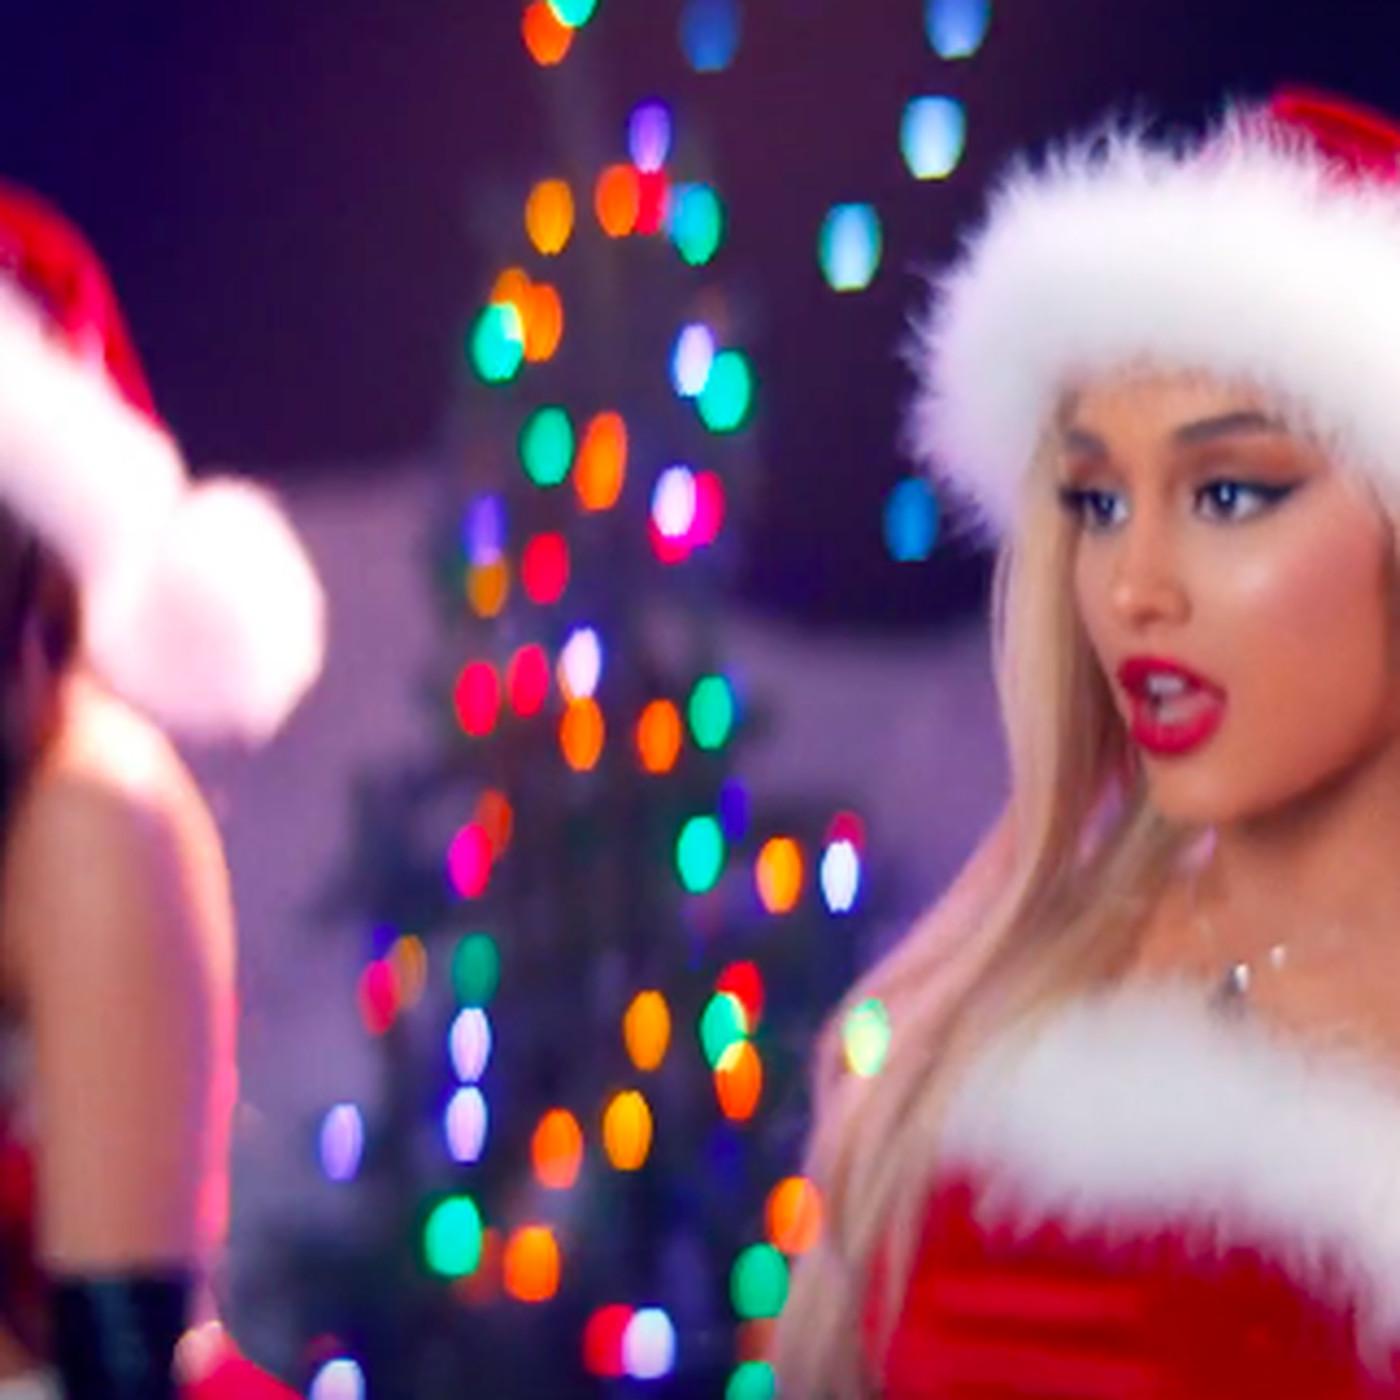 Ariana Grande's 'thank u, next' music video had over 000 people watching live